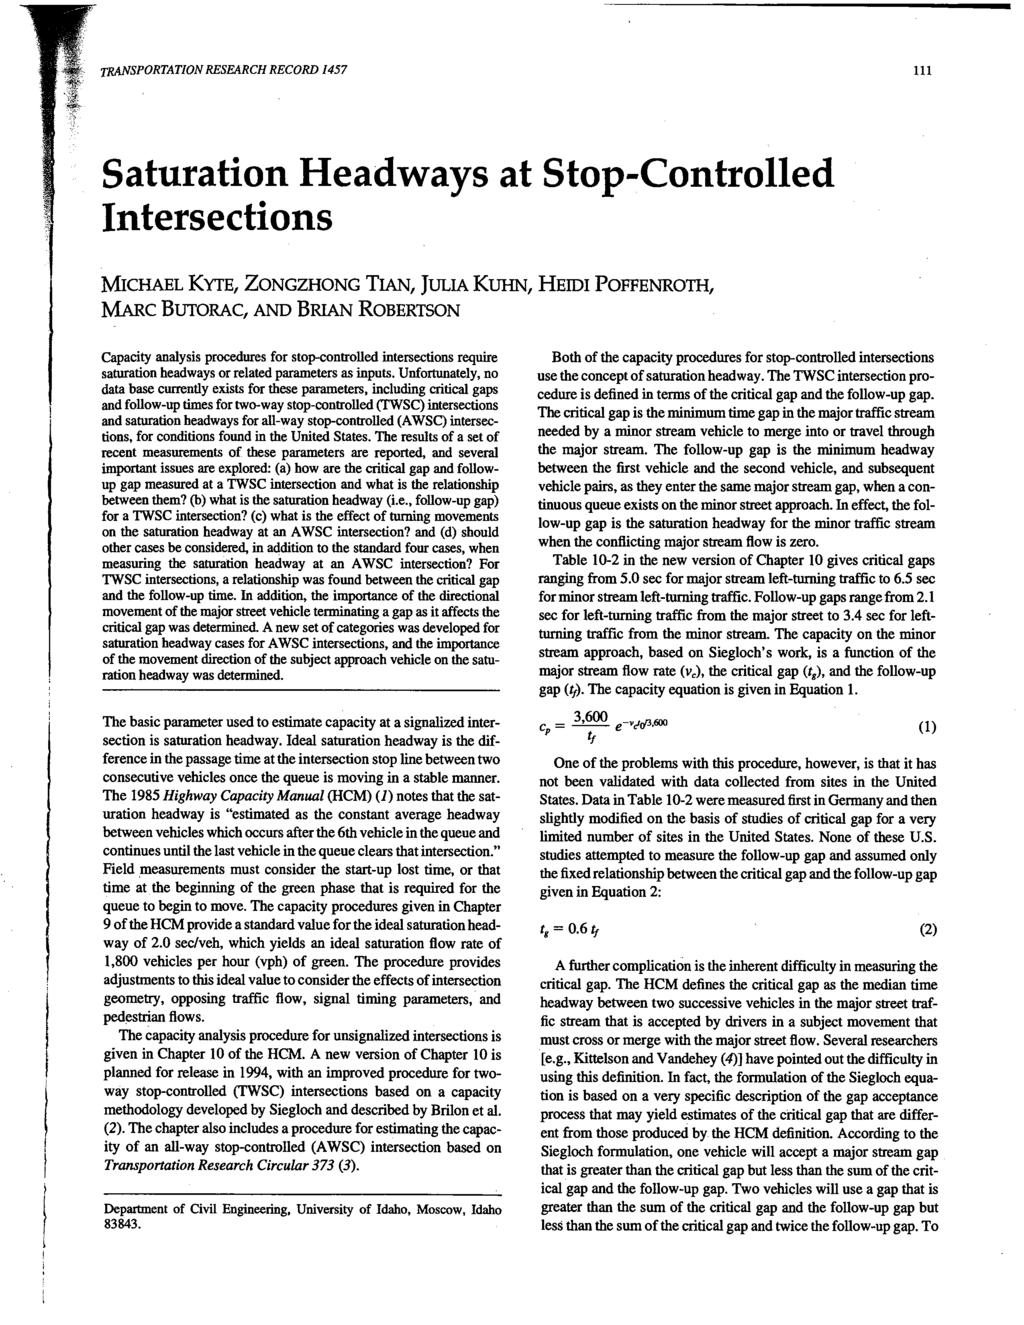 TRANSPORTATION RESEARCH RECORD 1457 111 Saturation Headways at Stop-Controlled Intersections MICHAEL KYTE, ZONGZHONG TIAN, JULIA KUHN, HEIDI POFFENROTH, MARc BUTORAC, AND BRIAN ROBERTSON Capacity